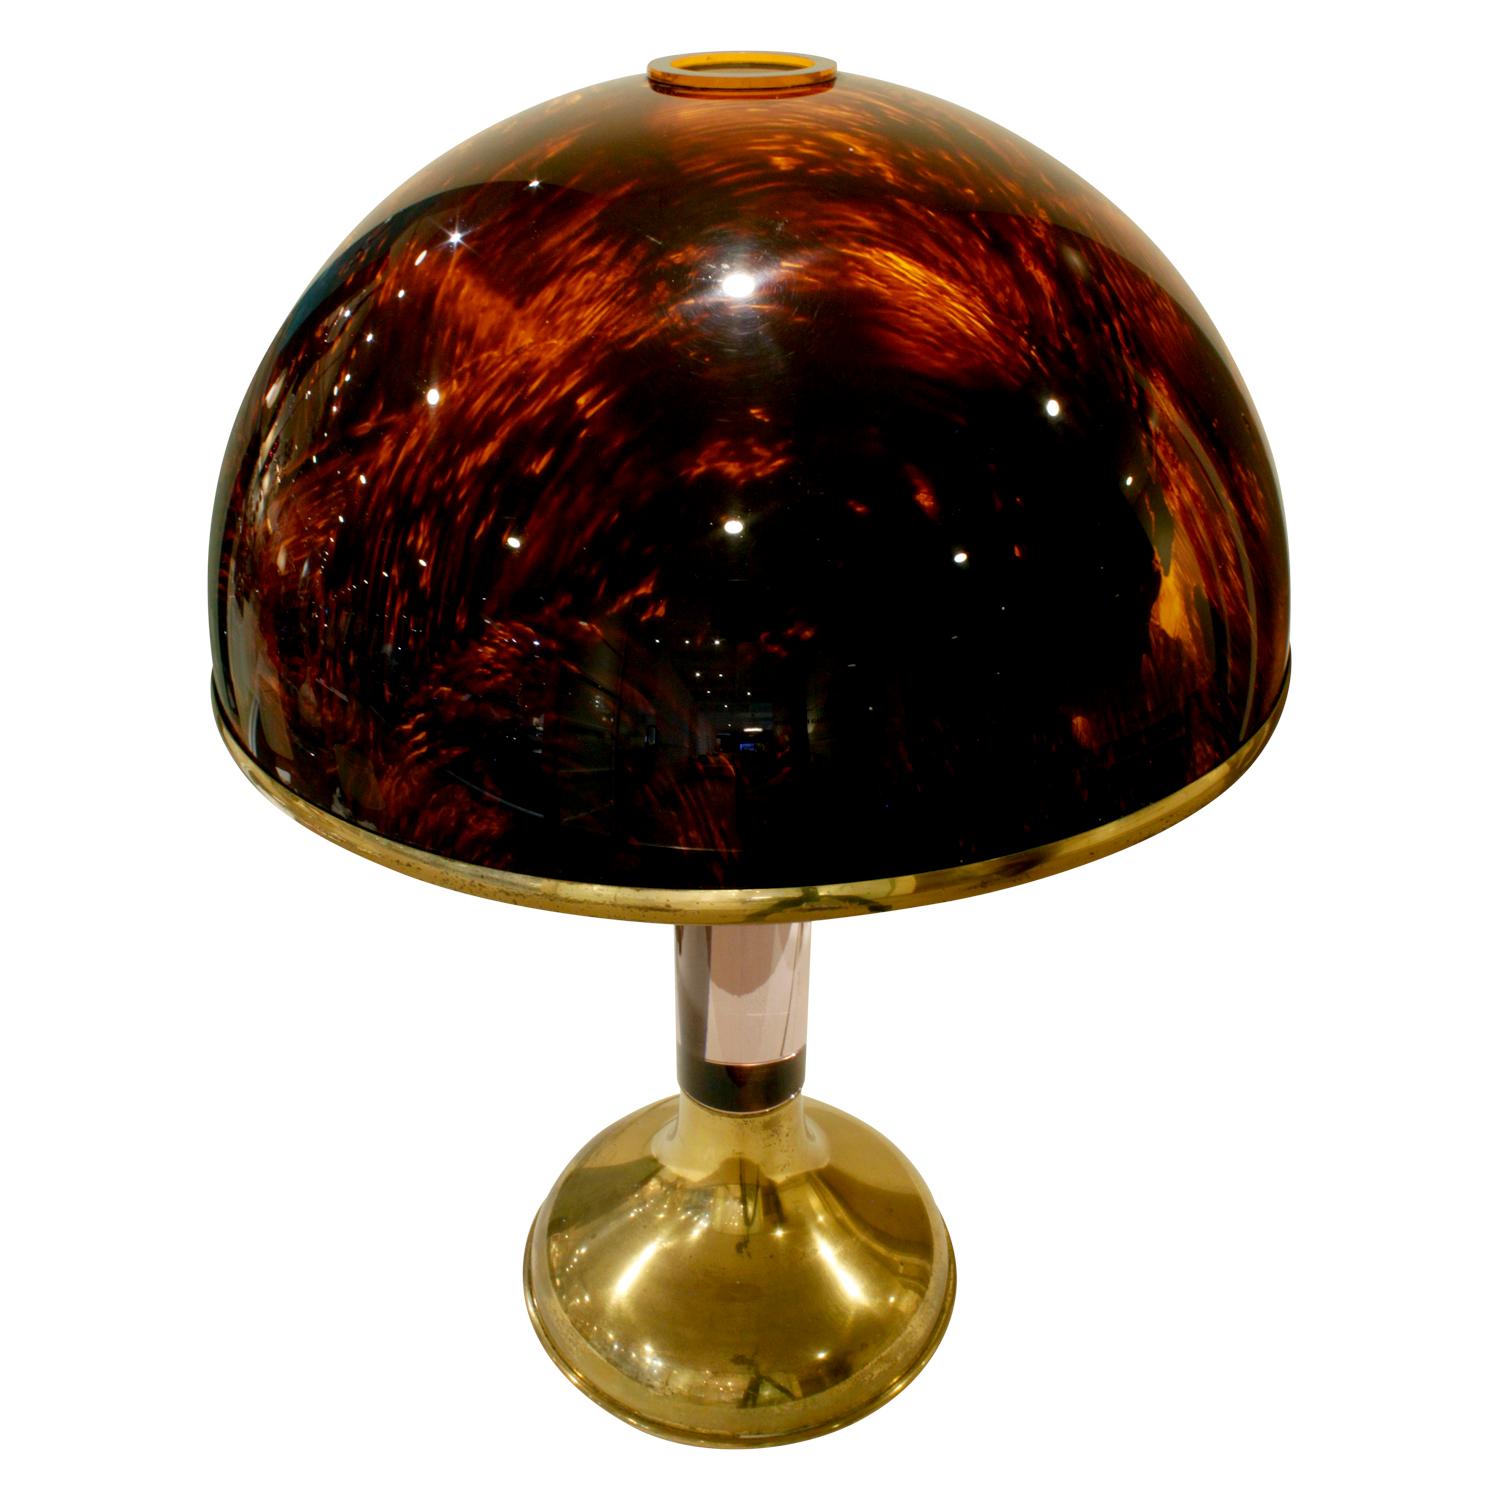 Table lamp in lavender Lucite and brass with tortoiseshell Lucite shade, American 1970s.